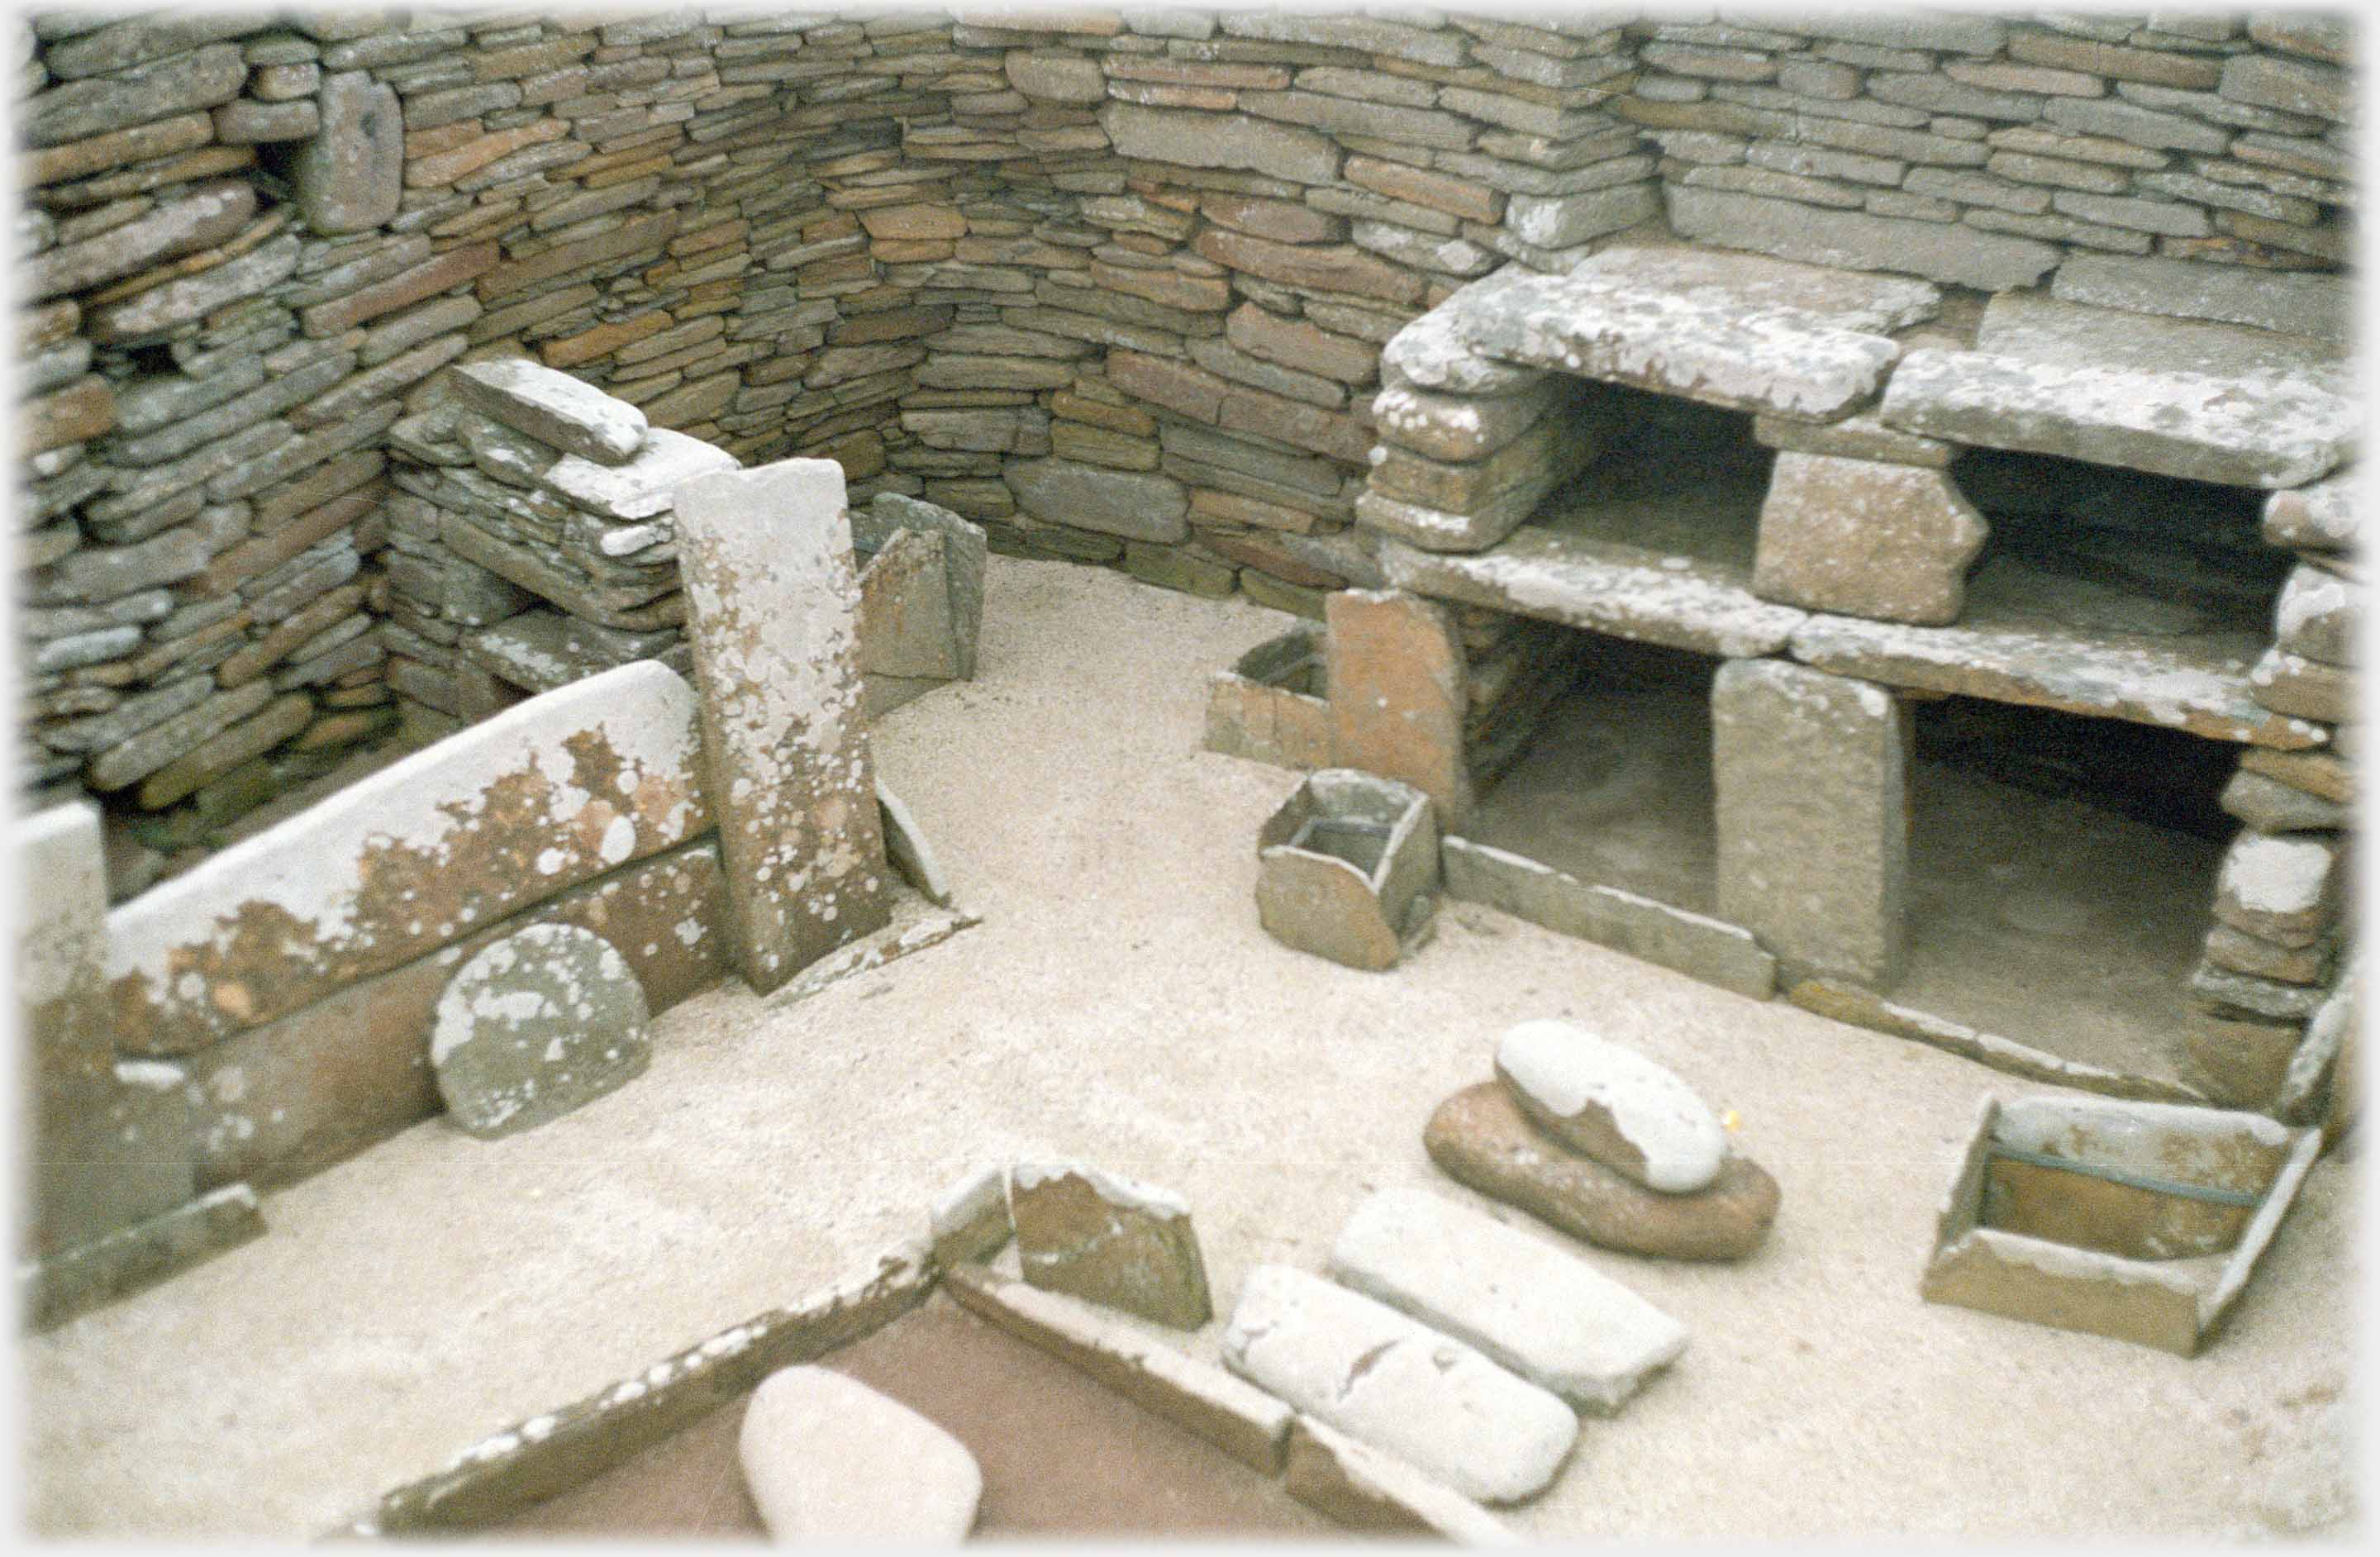 'Living' room with stones forming cupboard and hearth.